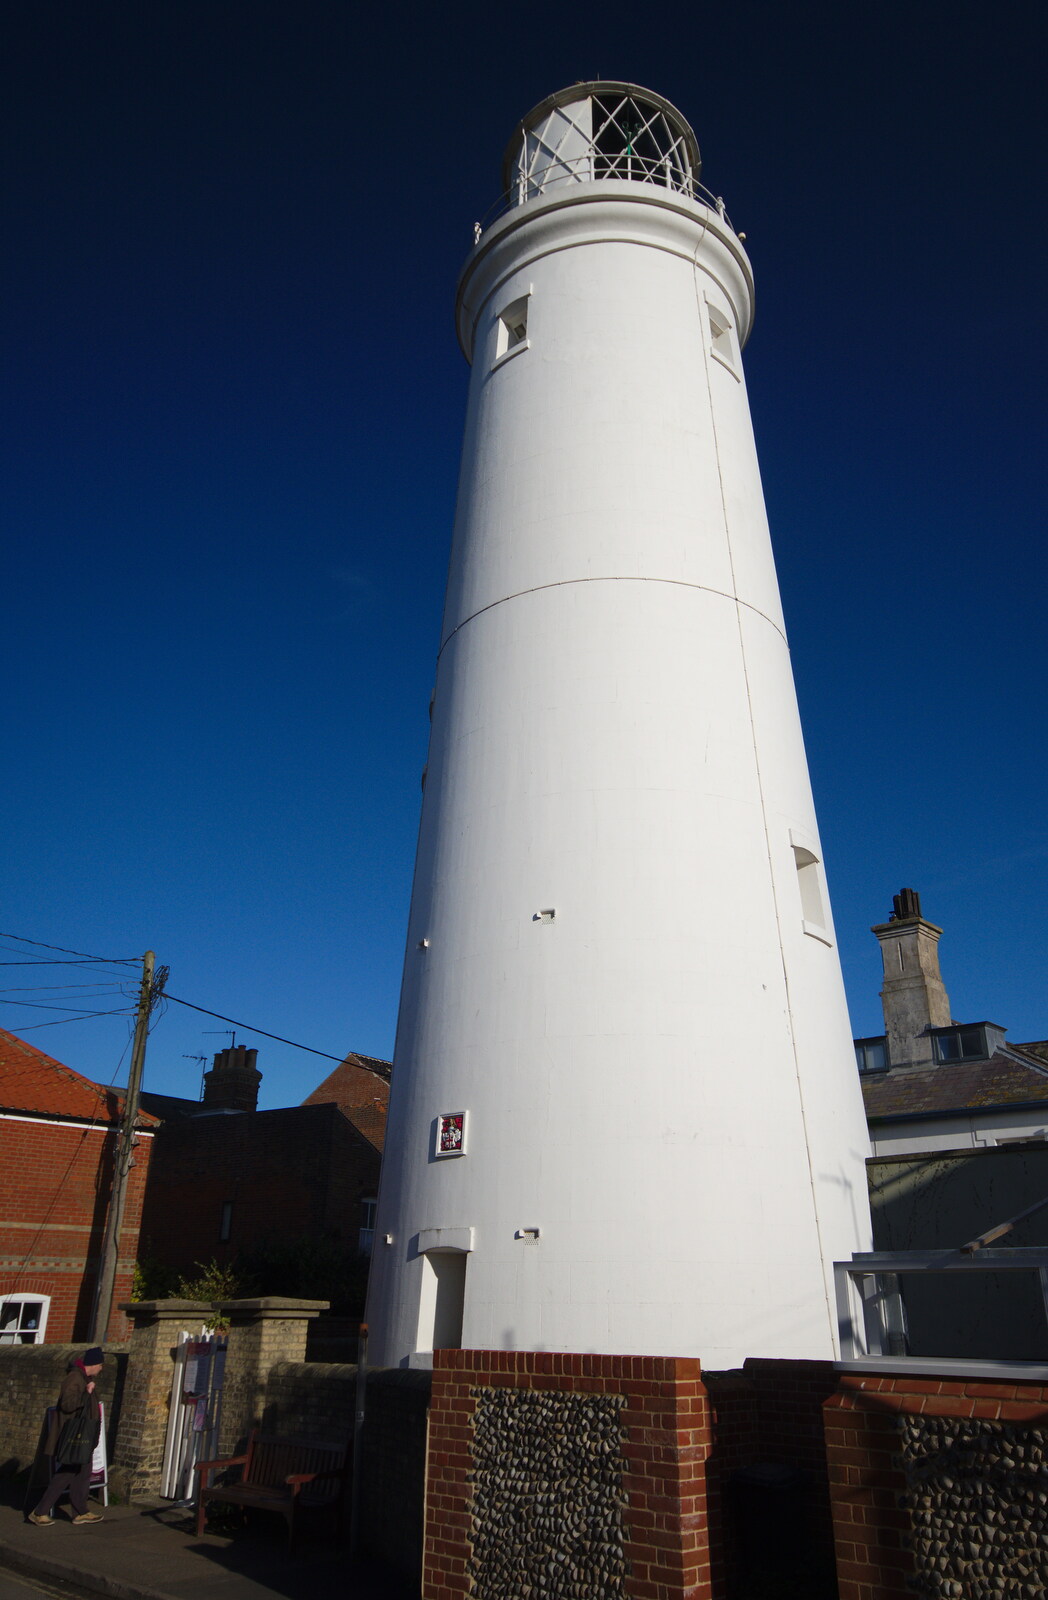 The Southwold lighthouse from A Trip up a Lighthouse, Southwold, Suffolk - 27th October 2019